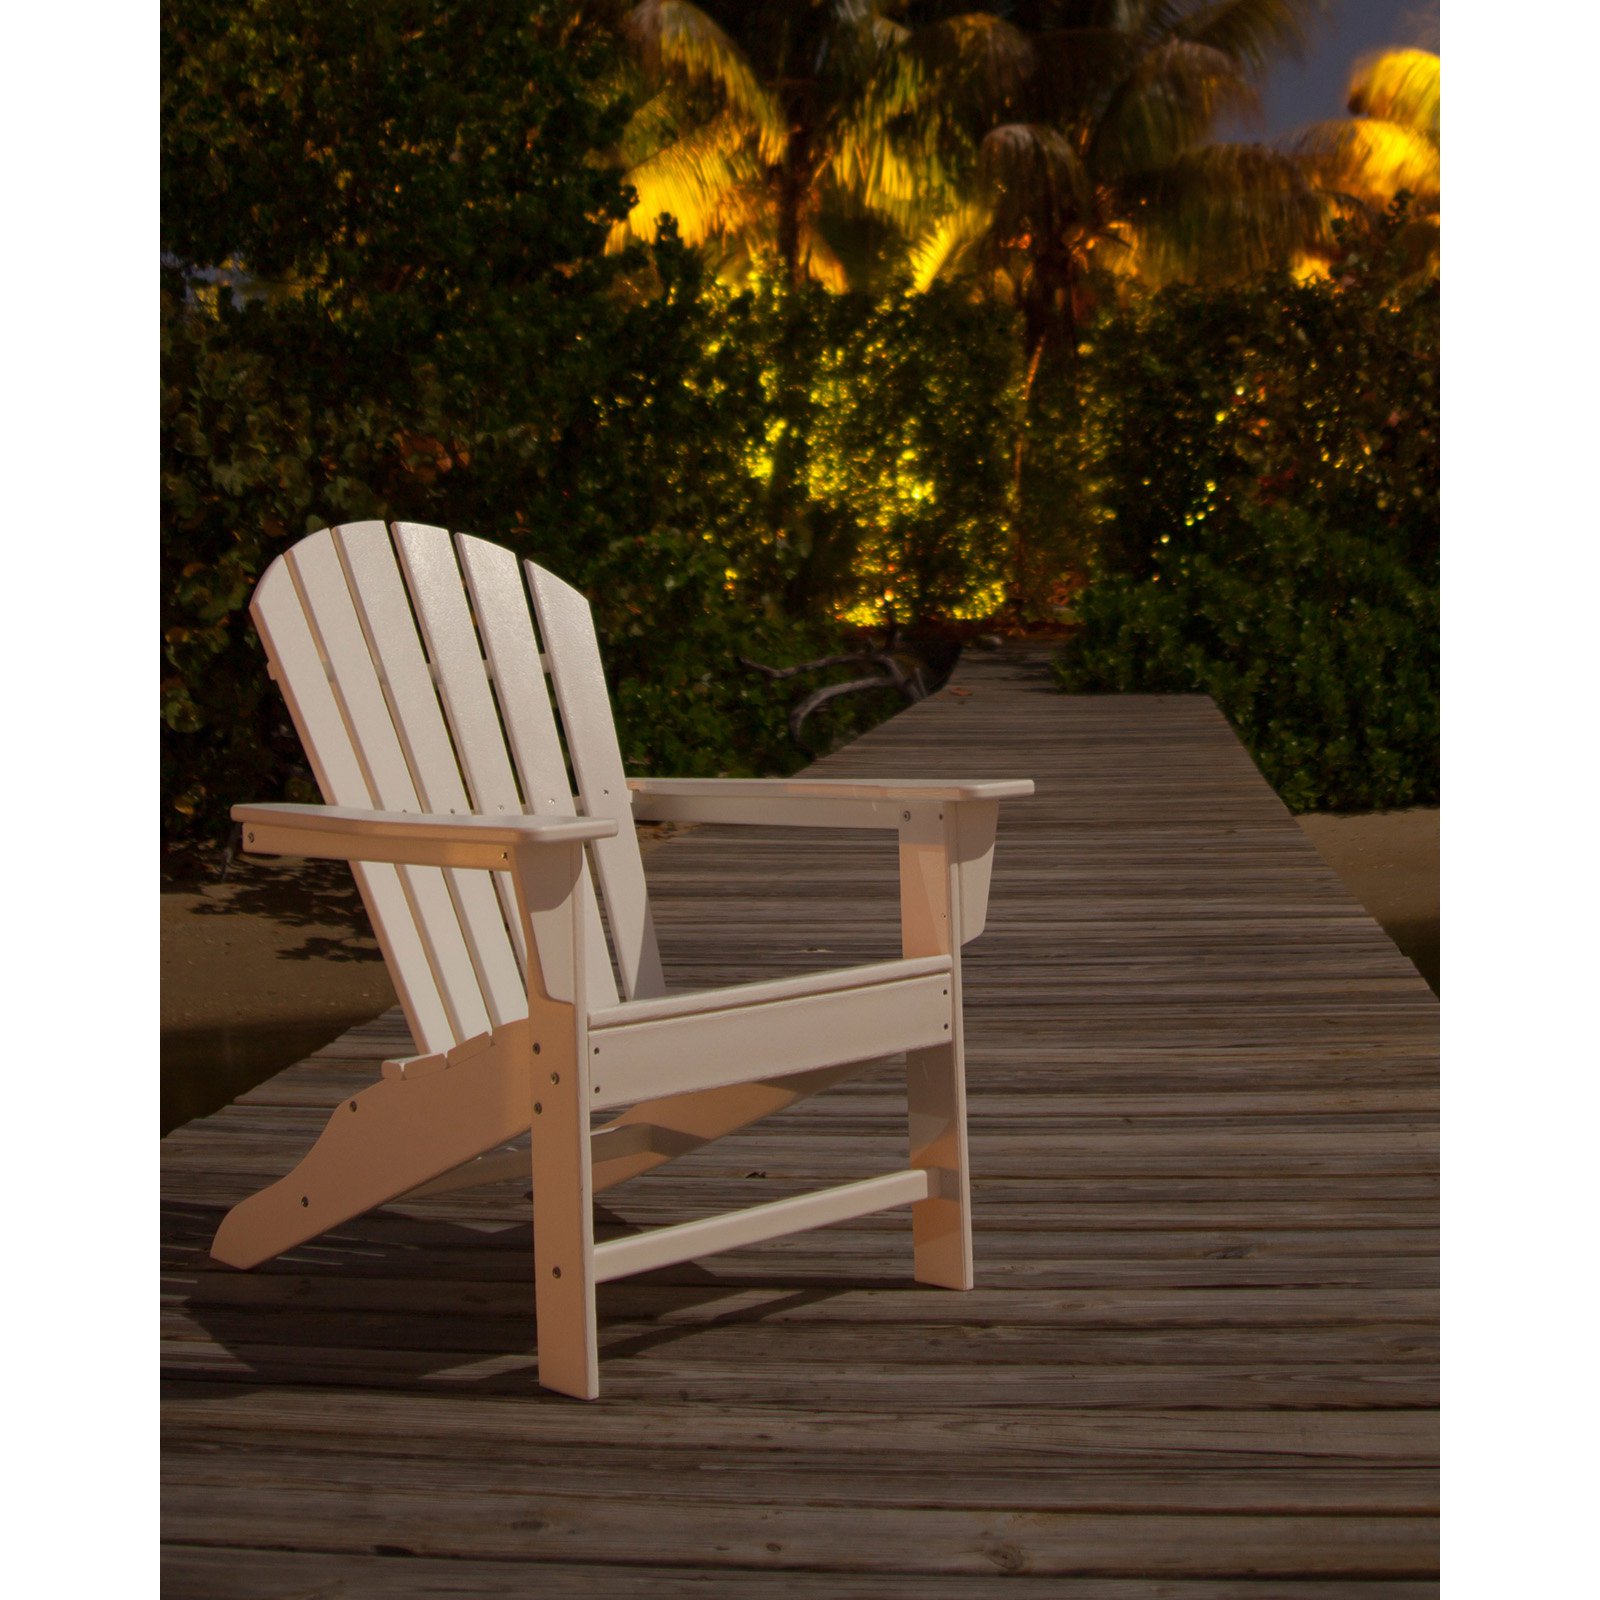 POLYWOOD&reg; South Beach Recycled Plastic Adirondack Chair - image 4 of 11